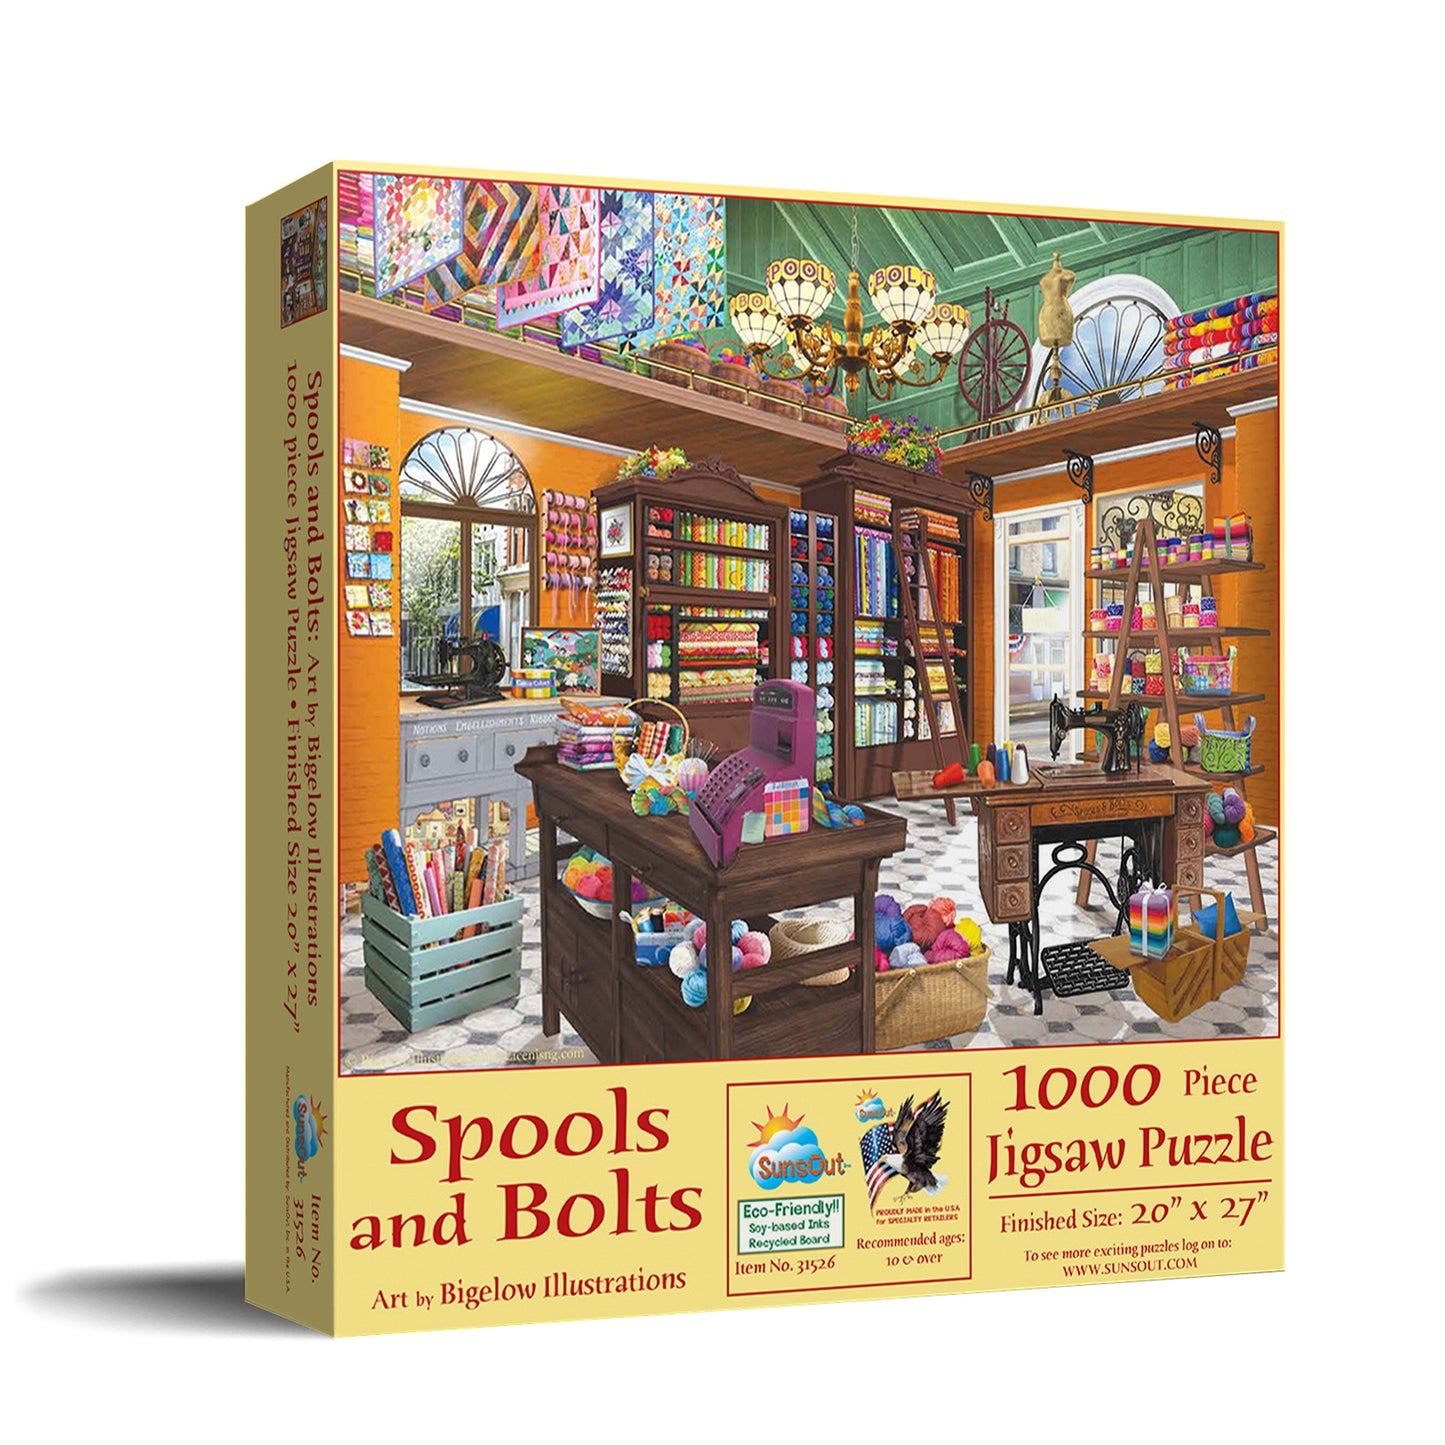 Spools and Bolts - 1000 Piece Jigsaw Puzzle